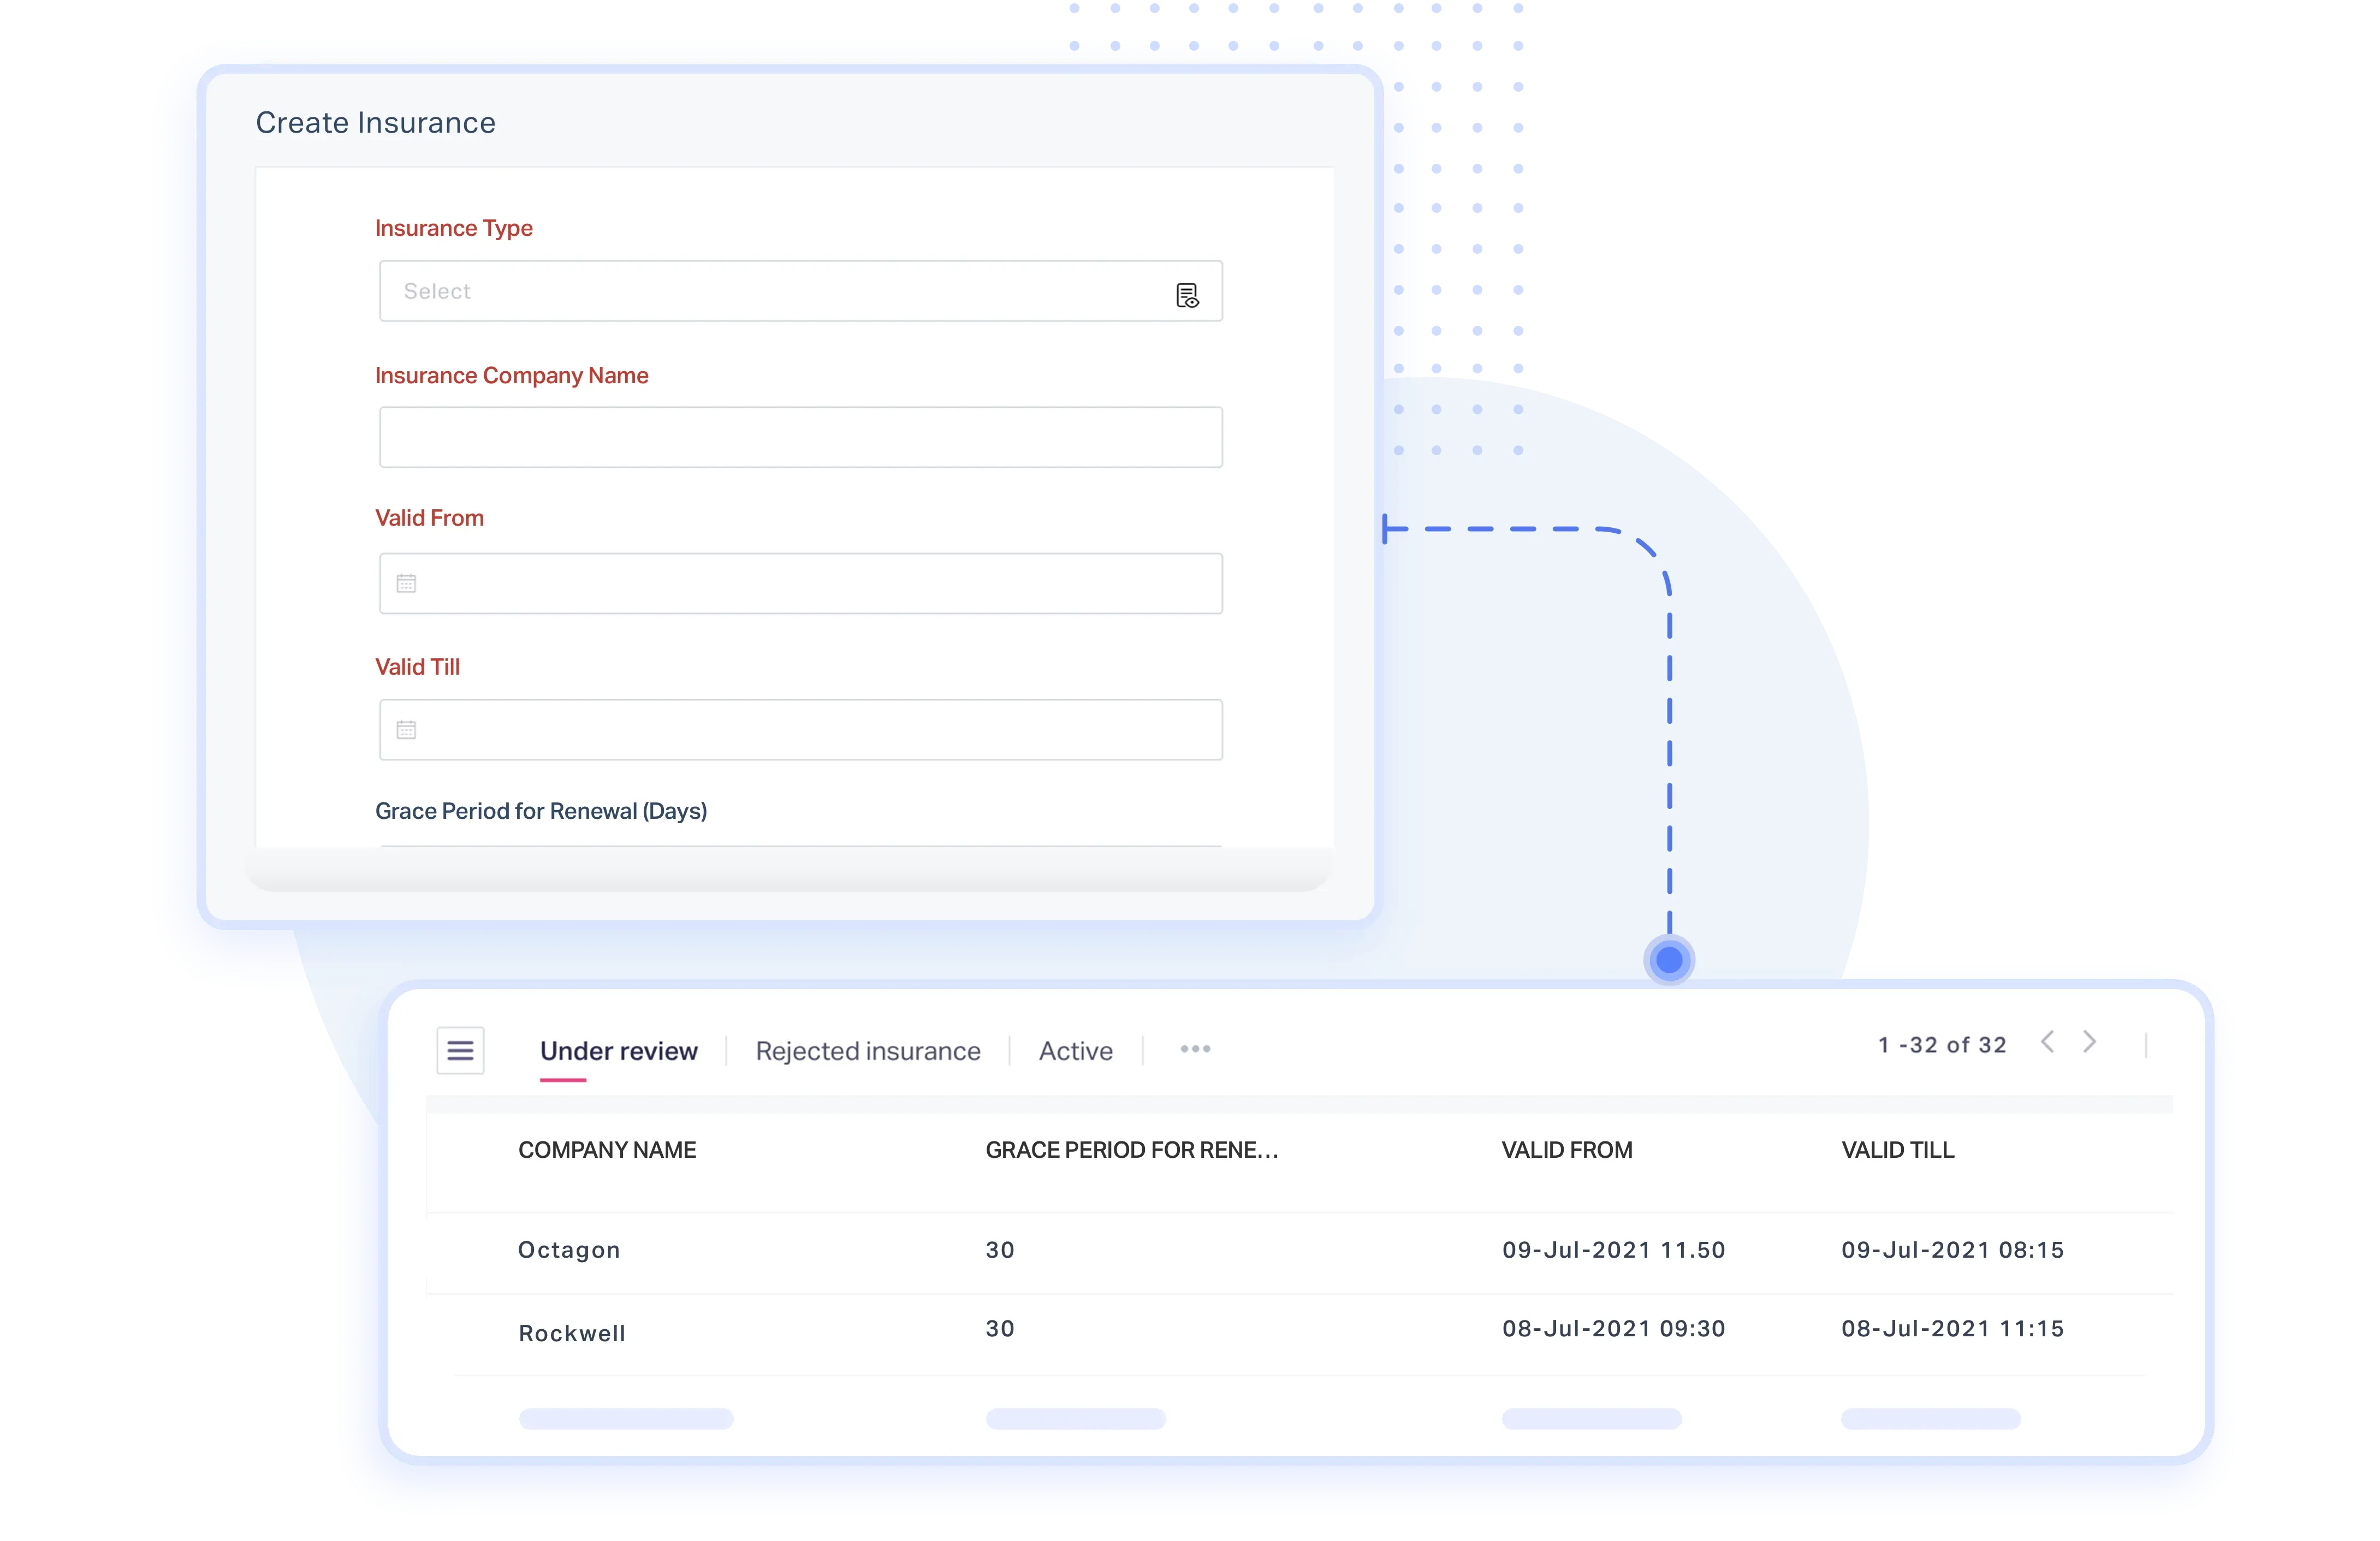 See vendor authorizations, licences and certifications and more in one place. Simplify induction for every technician and track status in real time to ensure safety for all